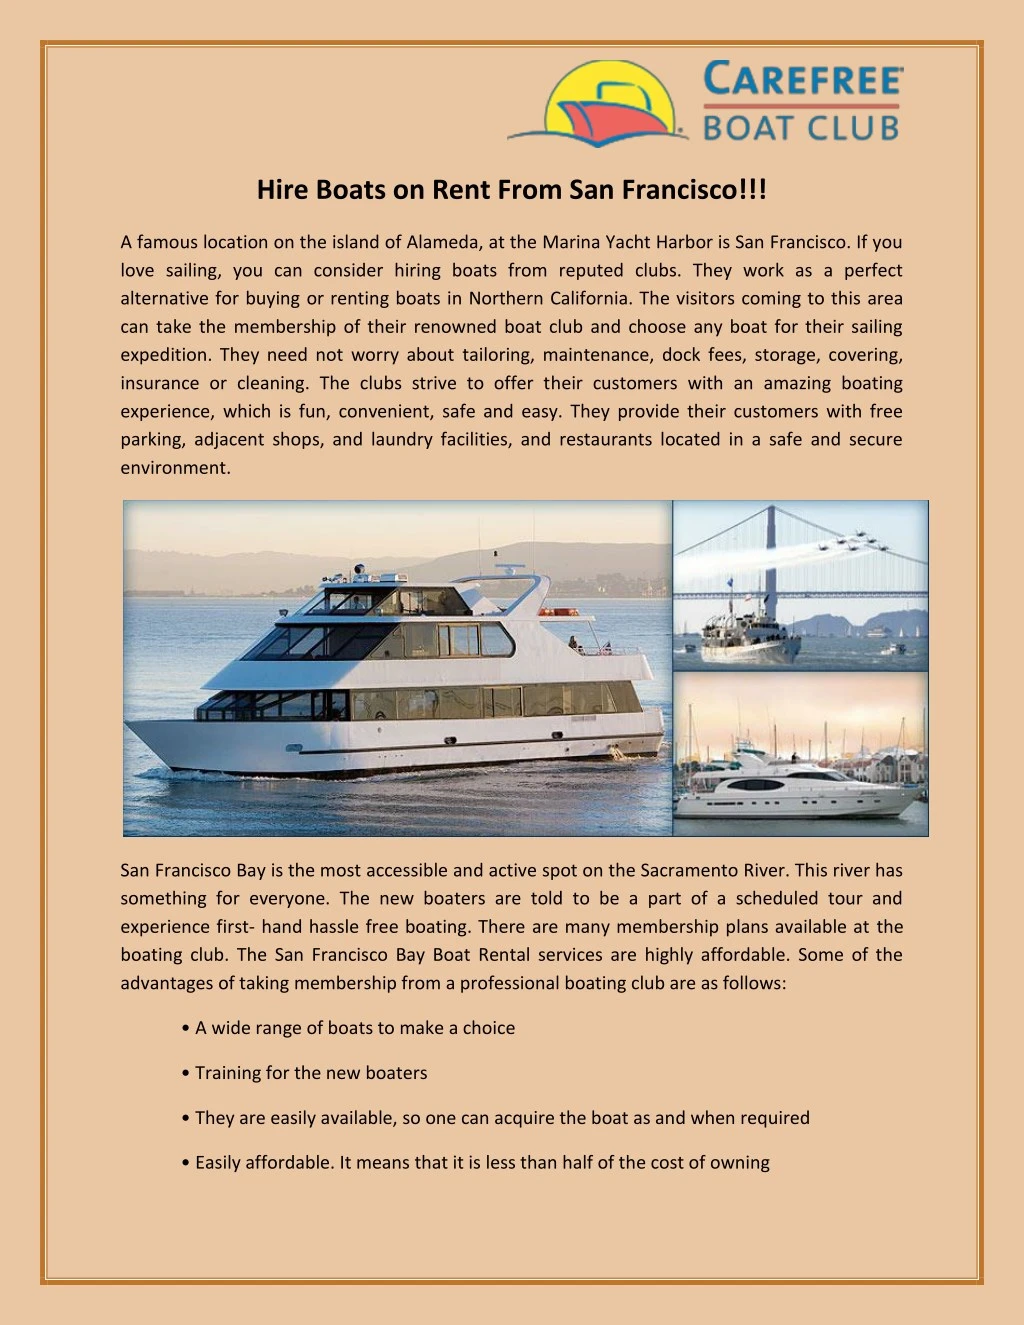 hire boats on rent from san francisco